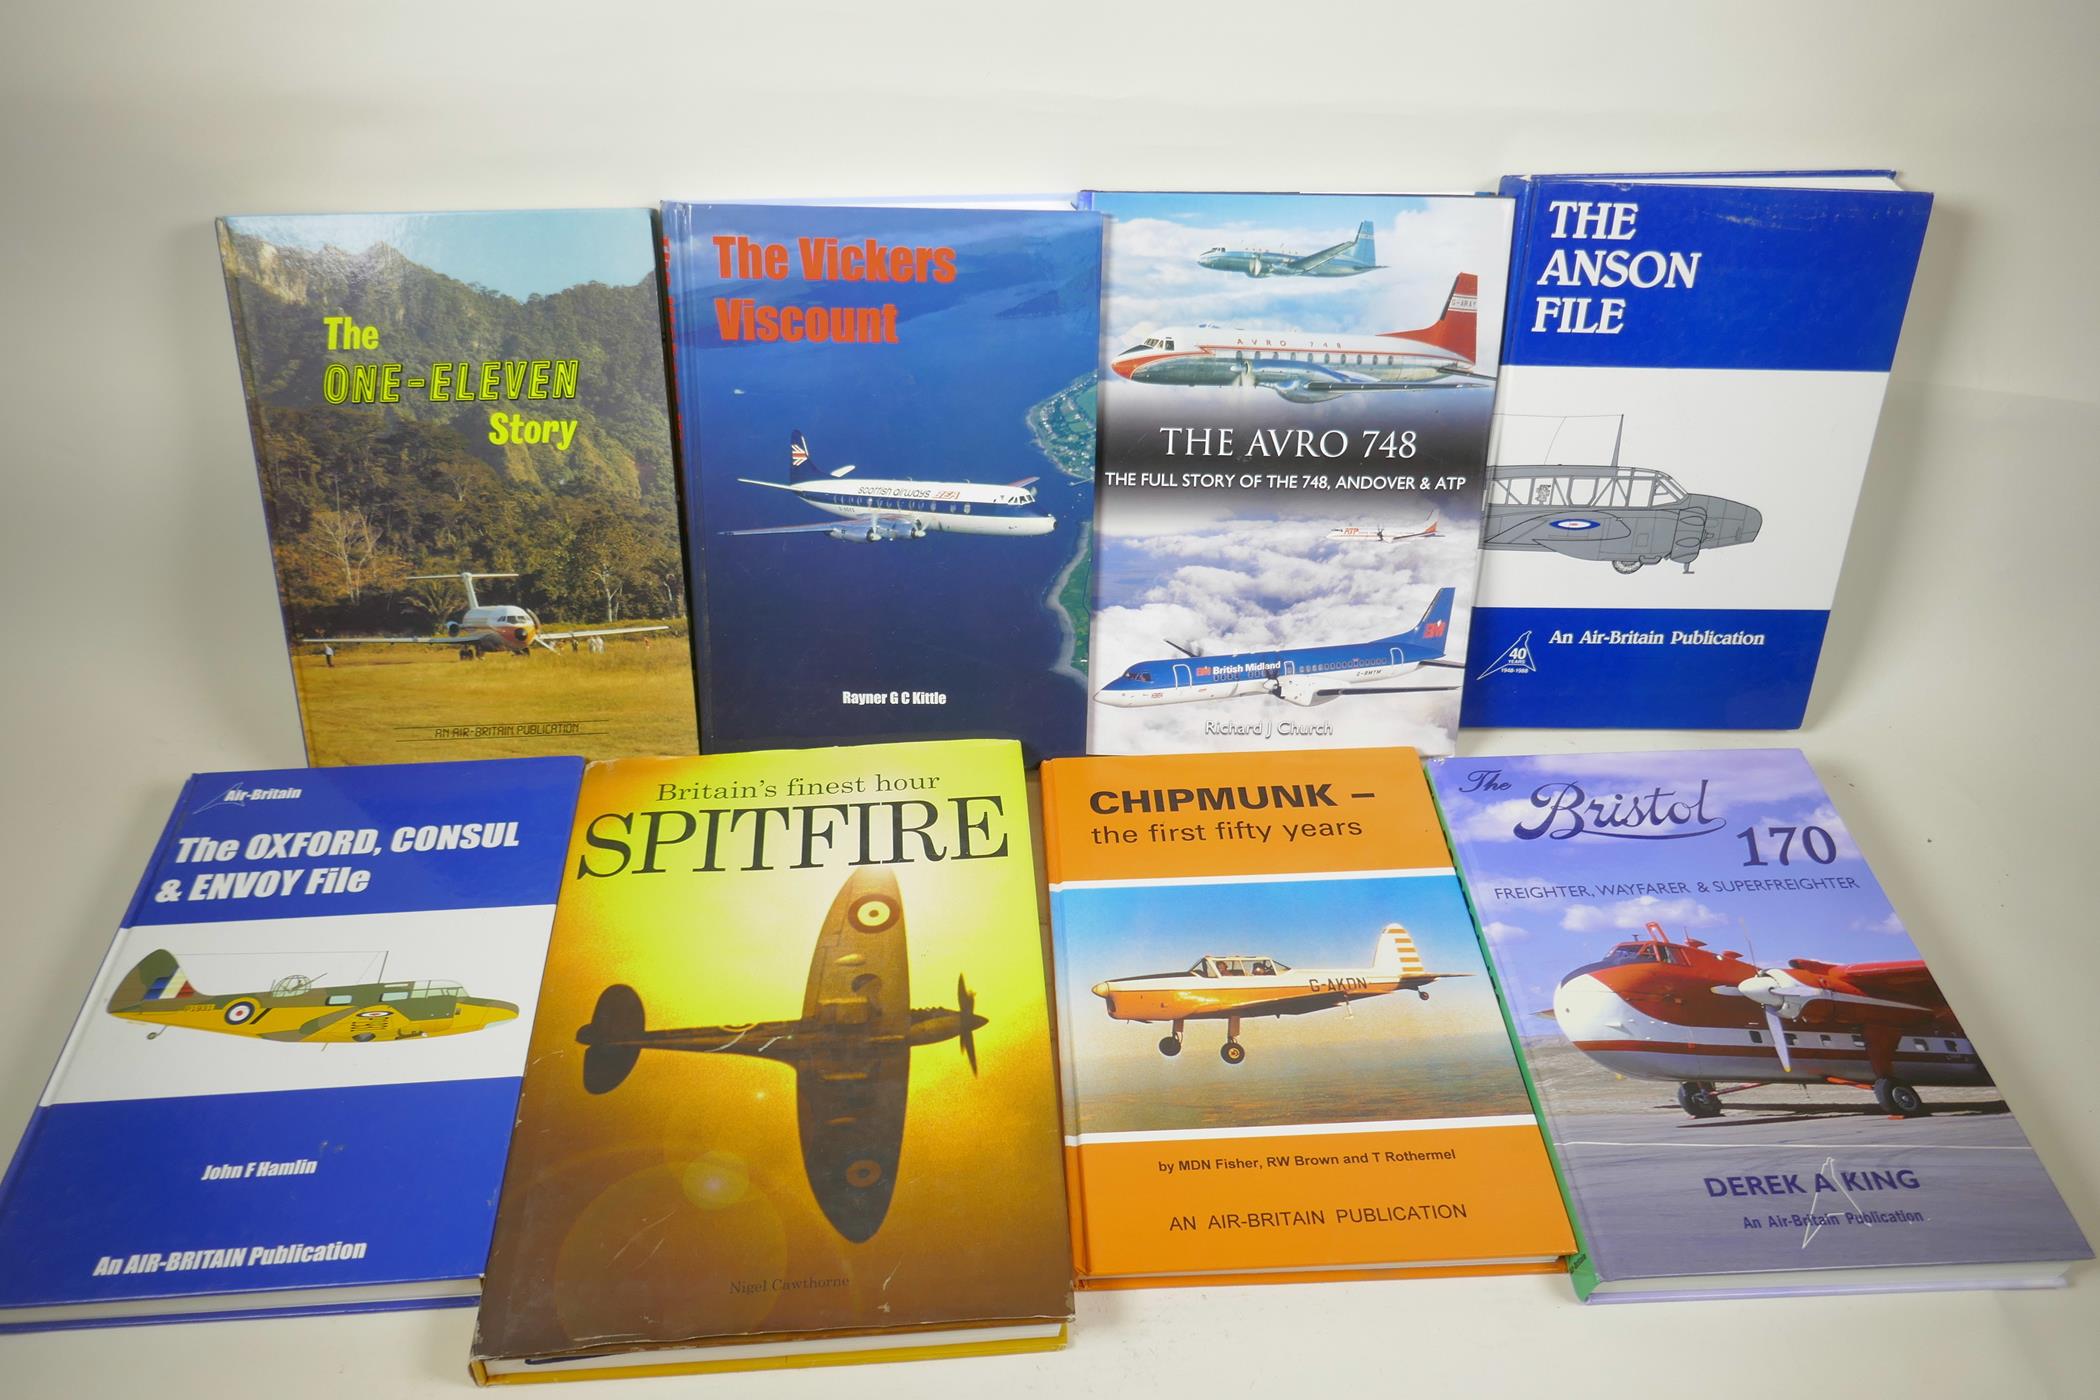 Eight volumes of aircraft specific books, the Anson File, the Oxford Consul and Envoy File, Chipmunk